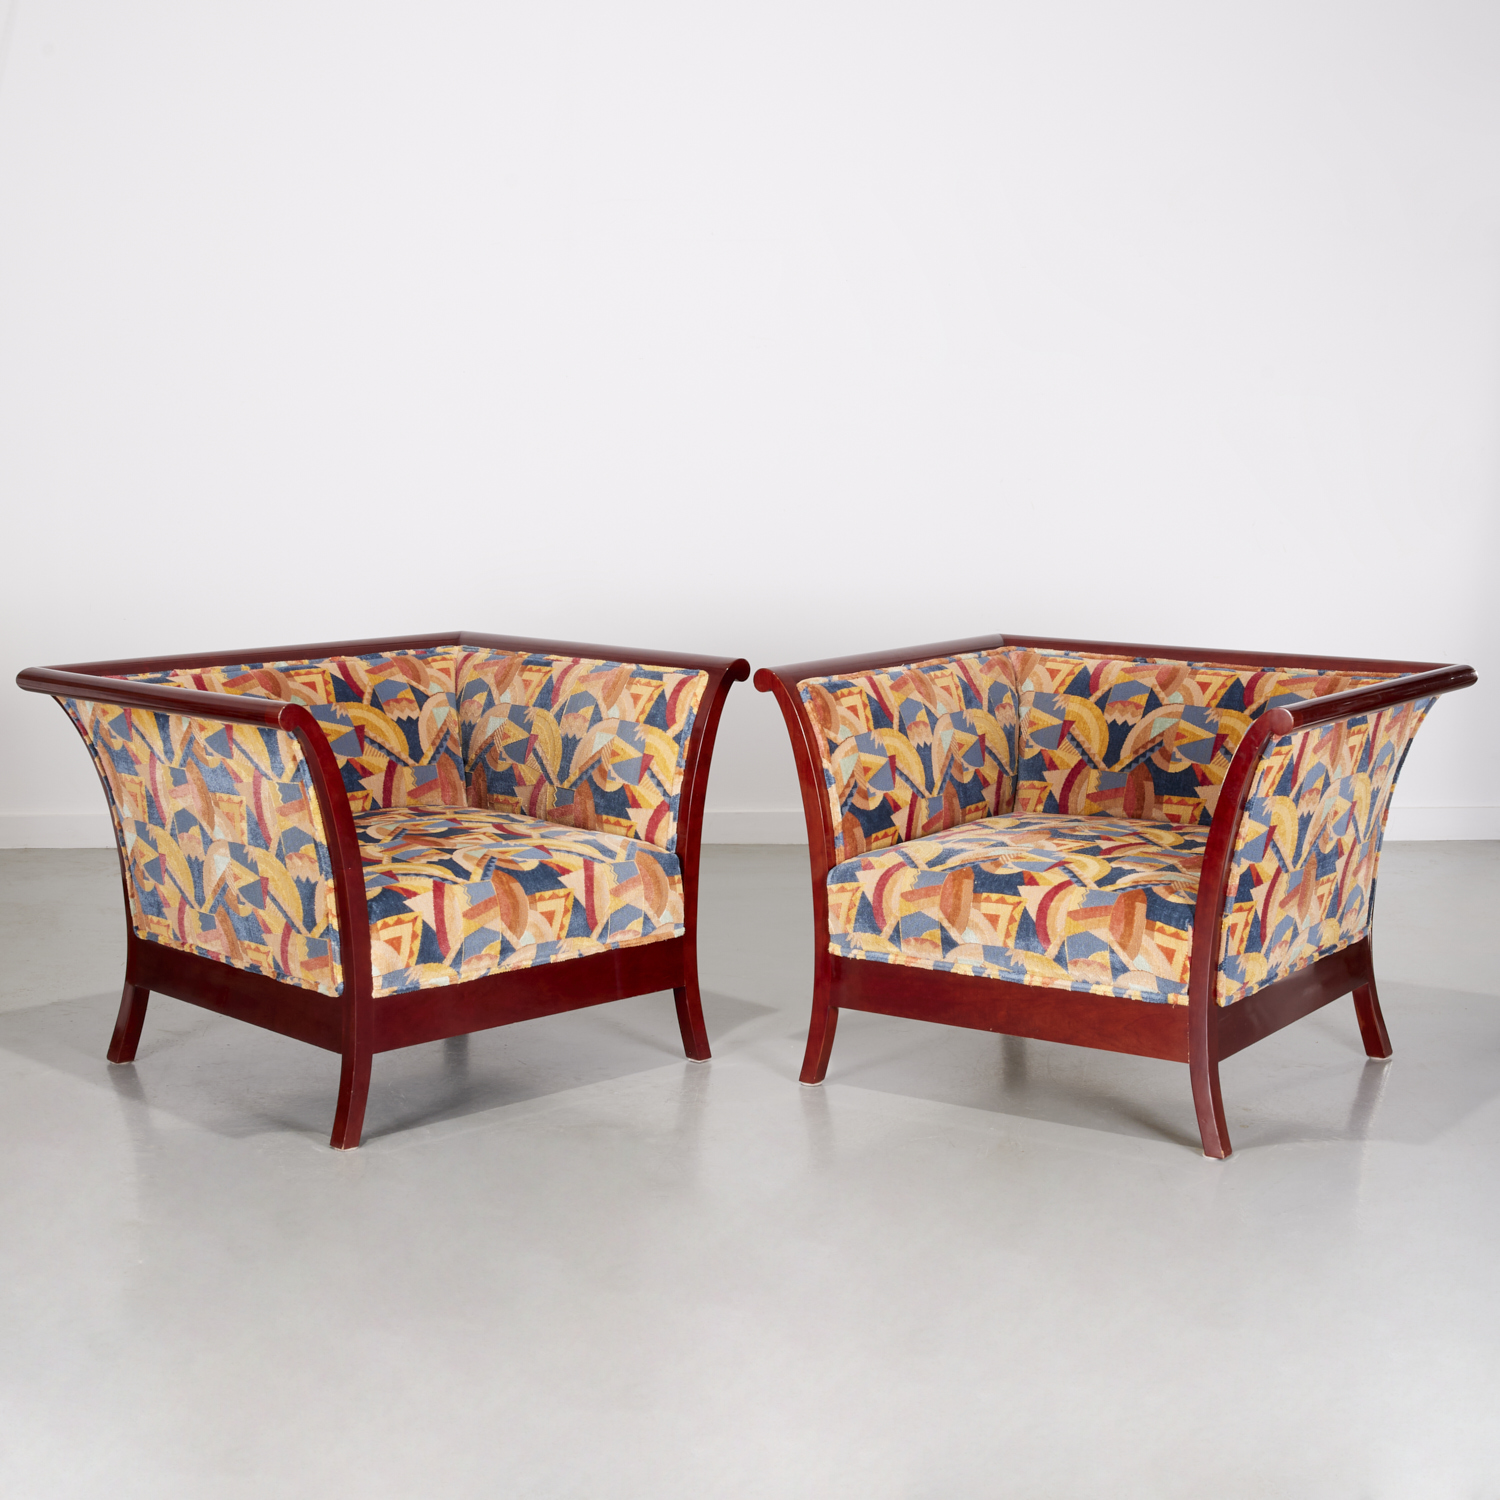 PAIR SECESSIONIST STYLE UPHOLSTERED